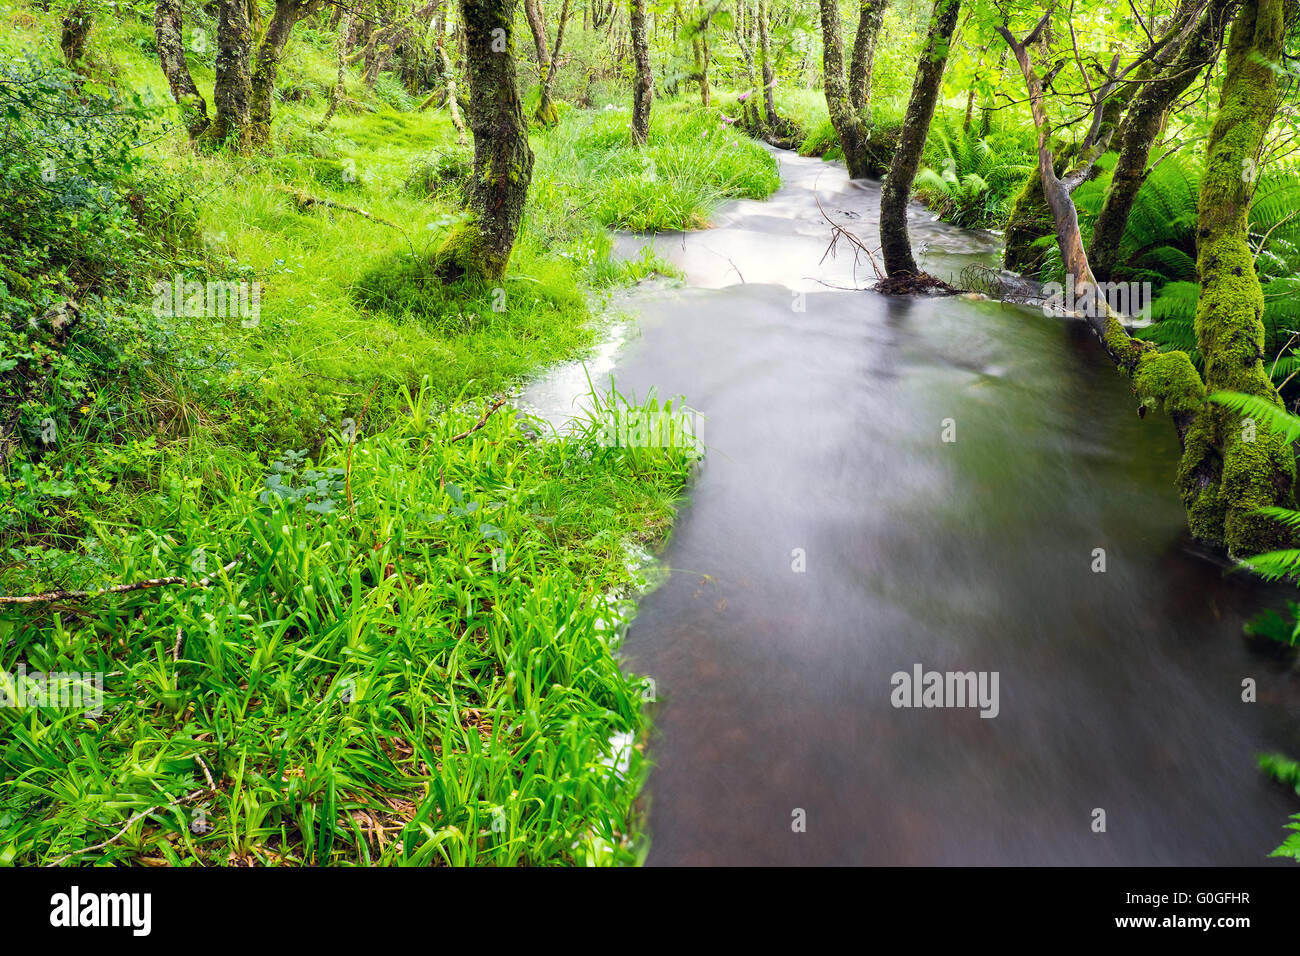 Small river in a green forest seen in the Highlands of Scotland Stock Photo